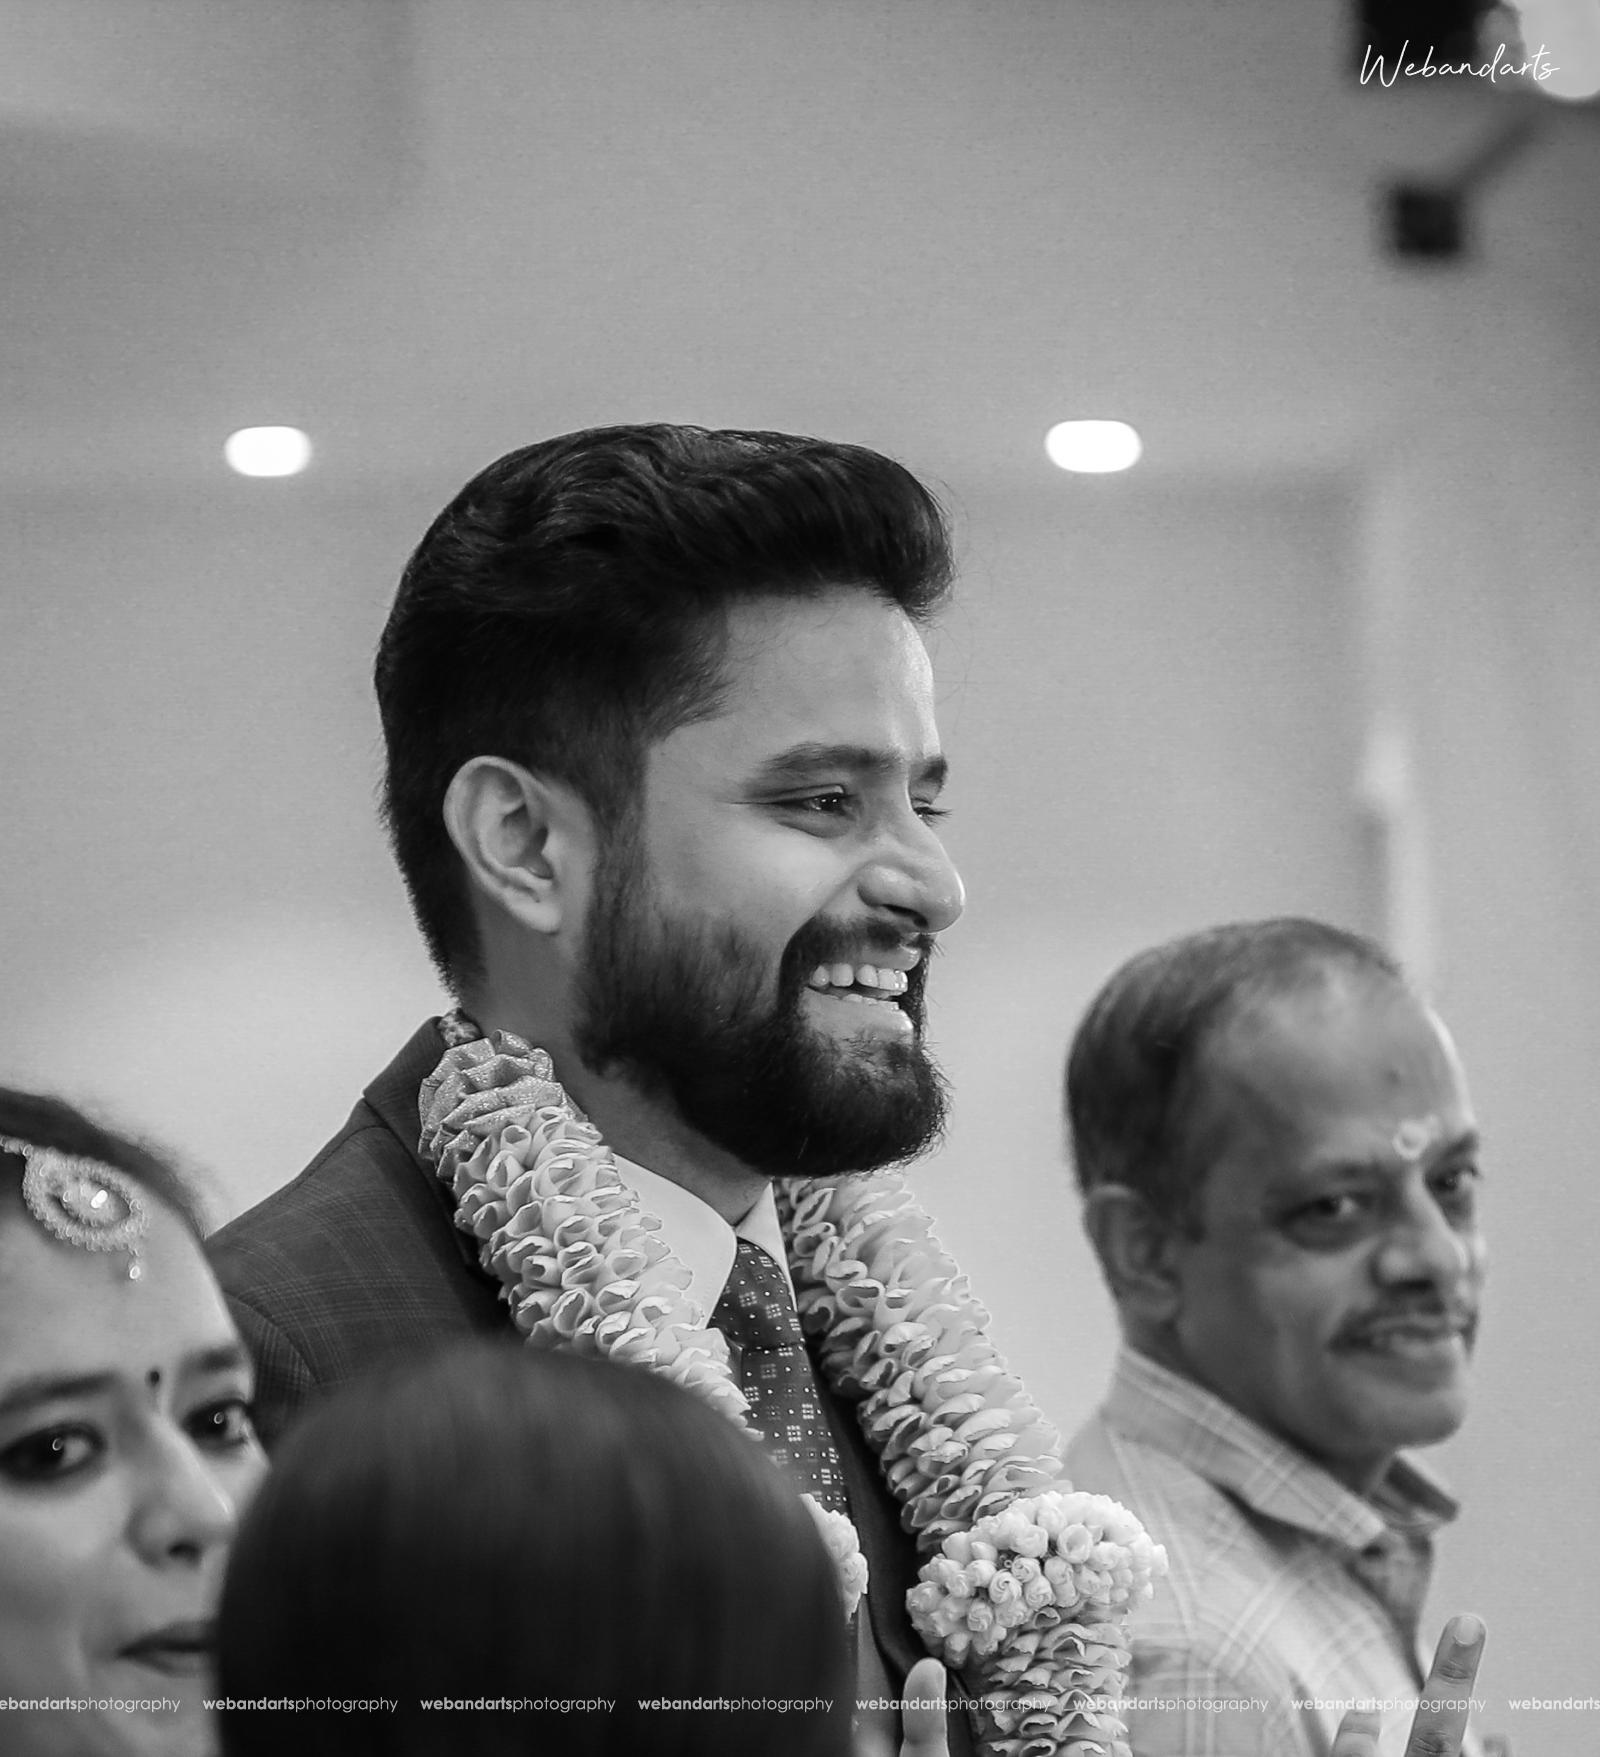 iyer_reception_photography_brahmin_groom_smile_black_white_picture-1180